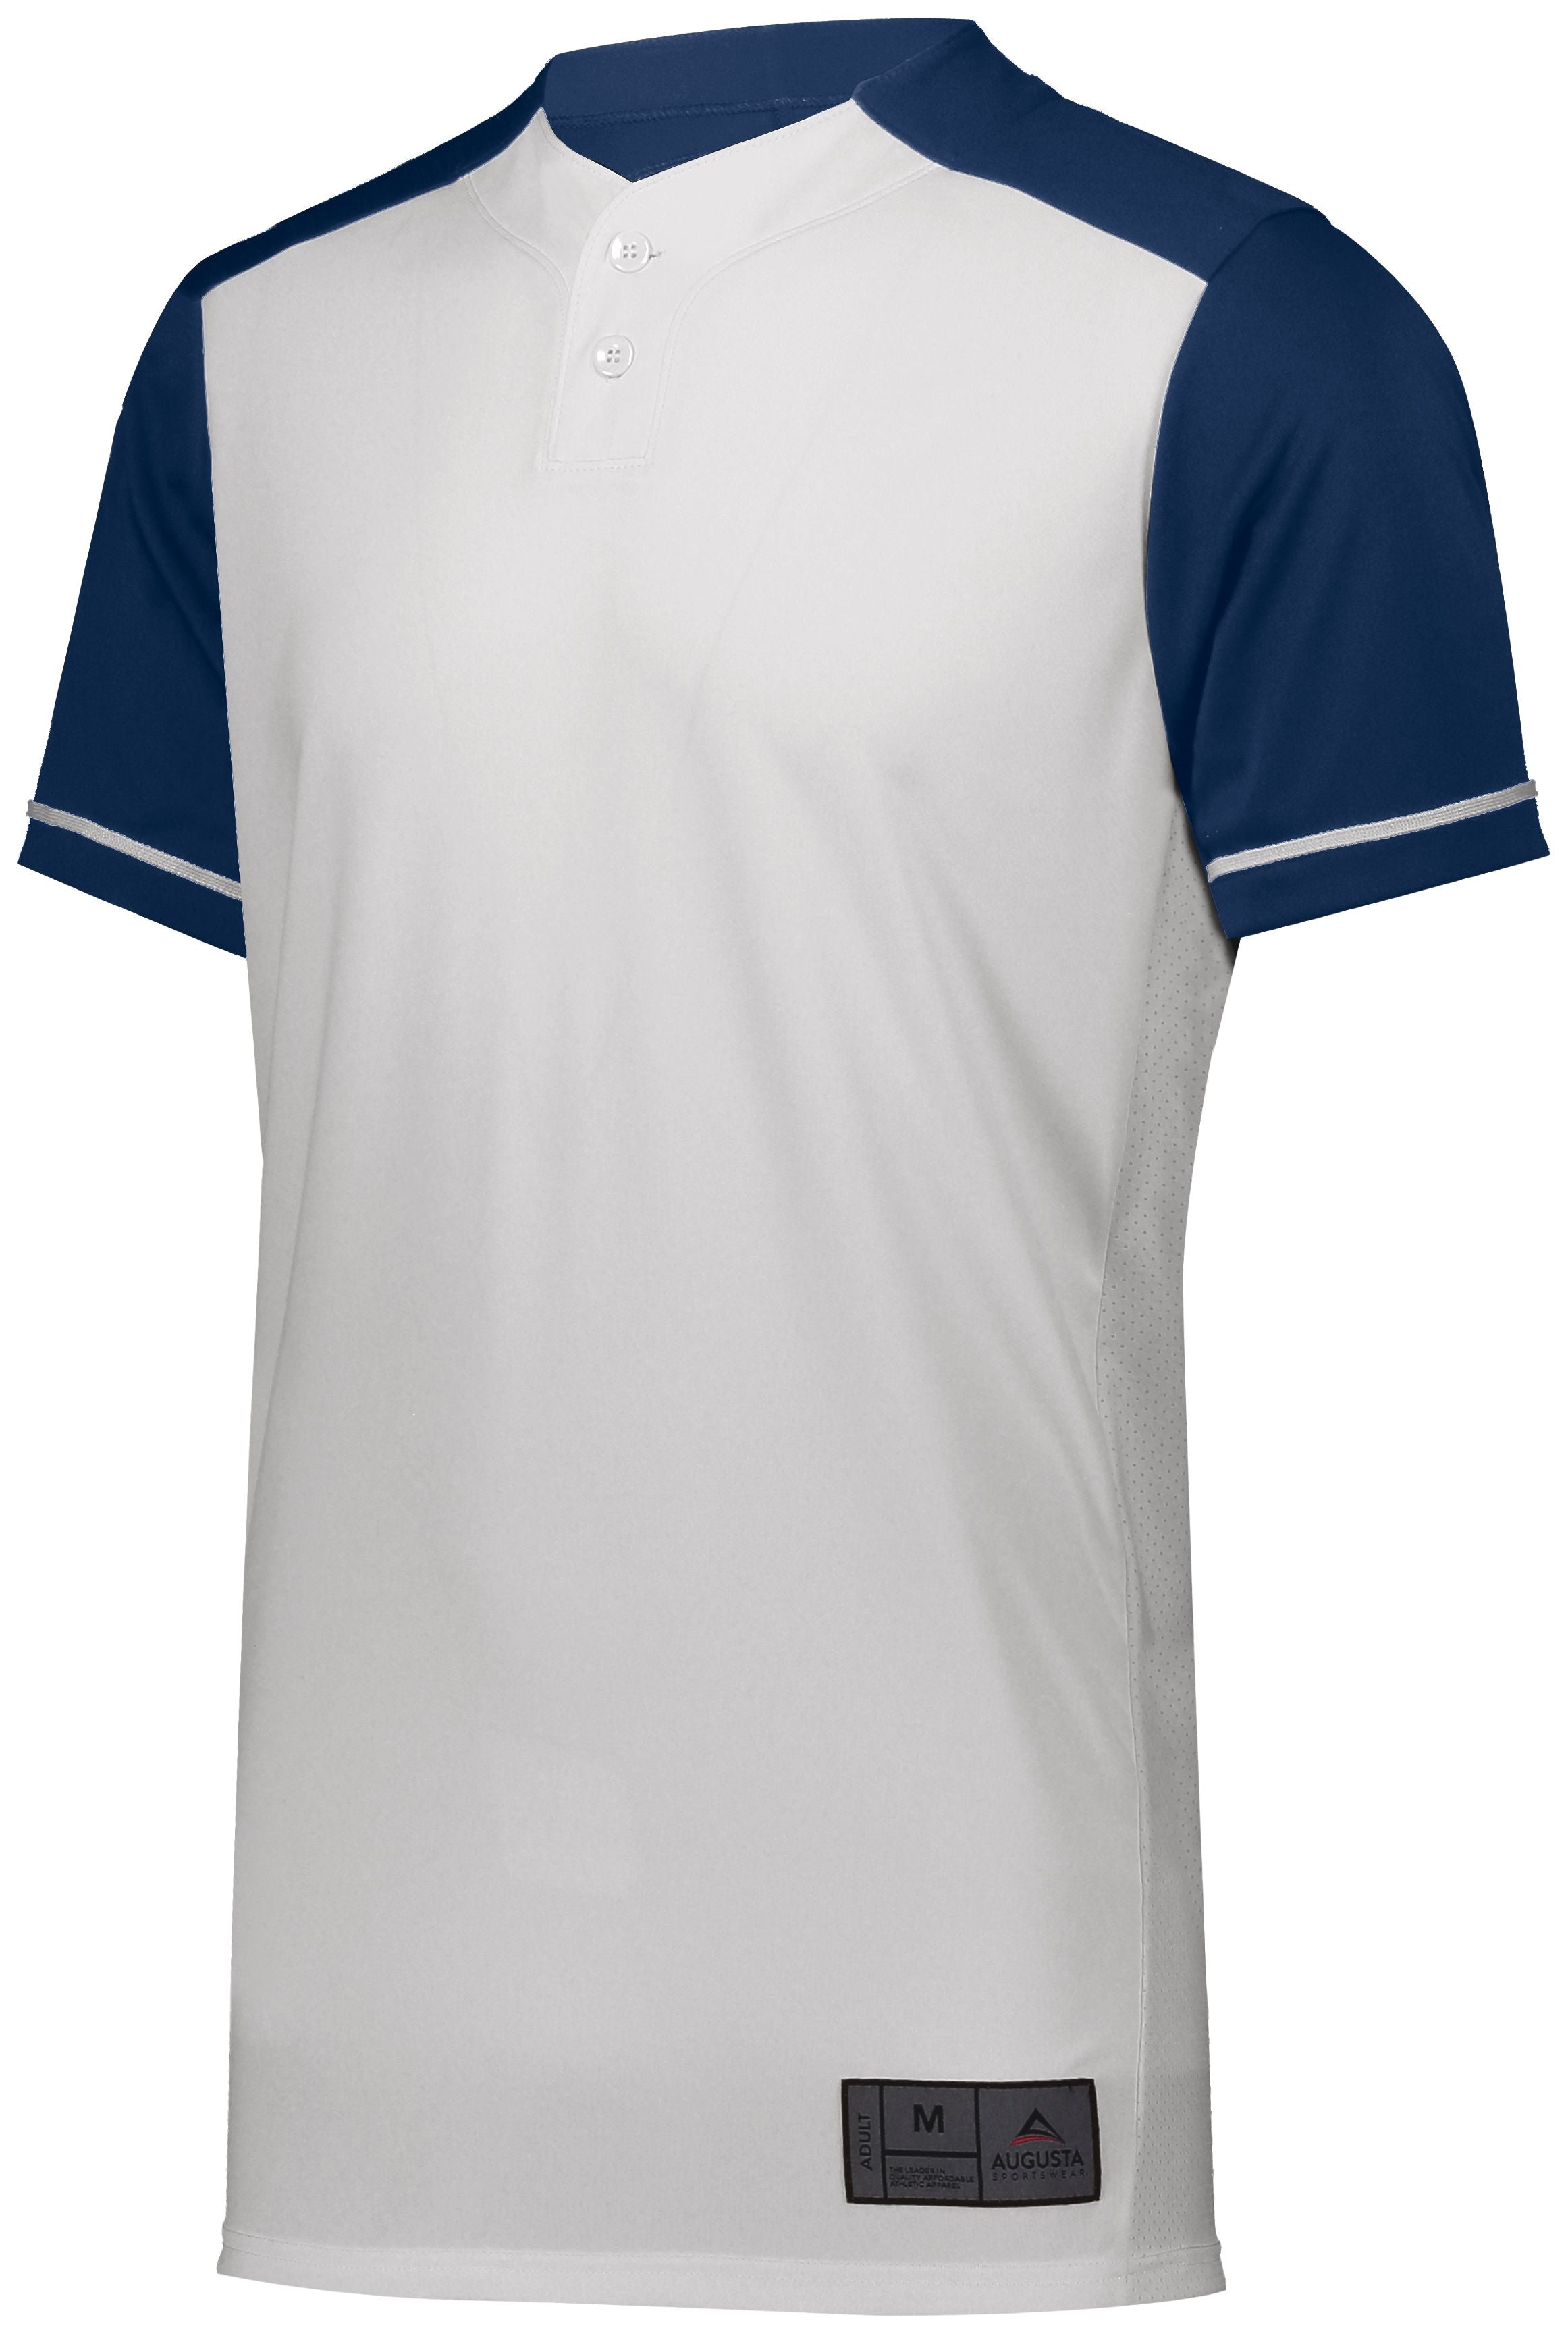 Augusta Sportswear Youth Closer Jersey in White/Navy  -Part of the Youth, Youth-Jersey, Augusta-Products, Baseball, Shirts, All-Sports, All-Sports-1 product lines at KanaleyCreations.com